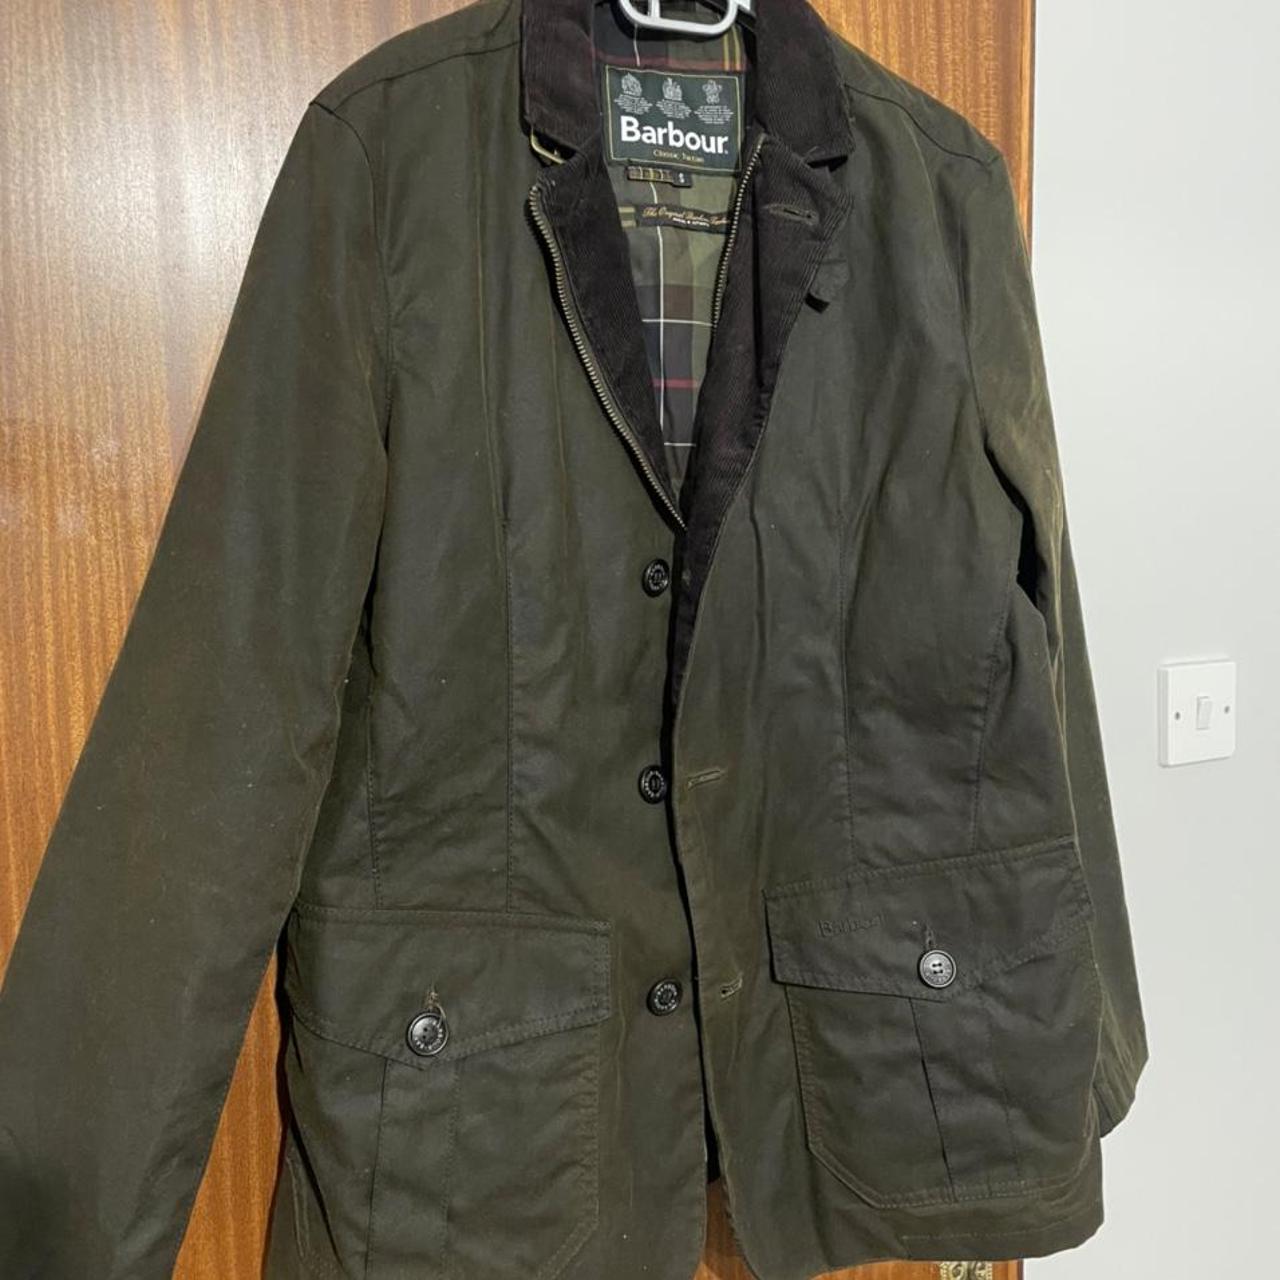 Mens Barbour wax jacket Size small Rarely worn as... - Depop